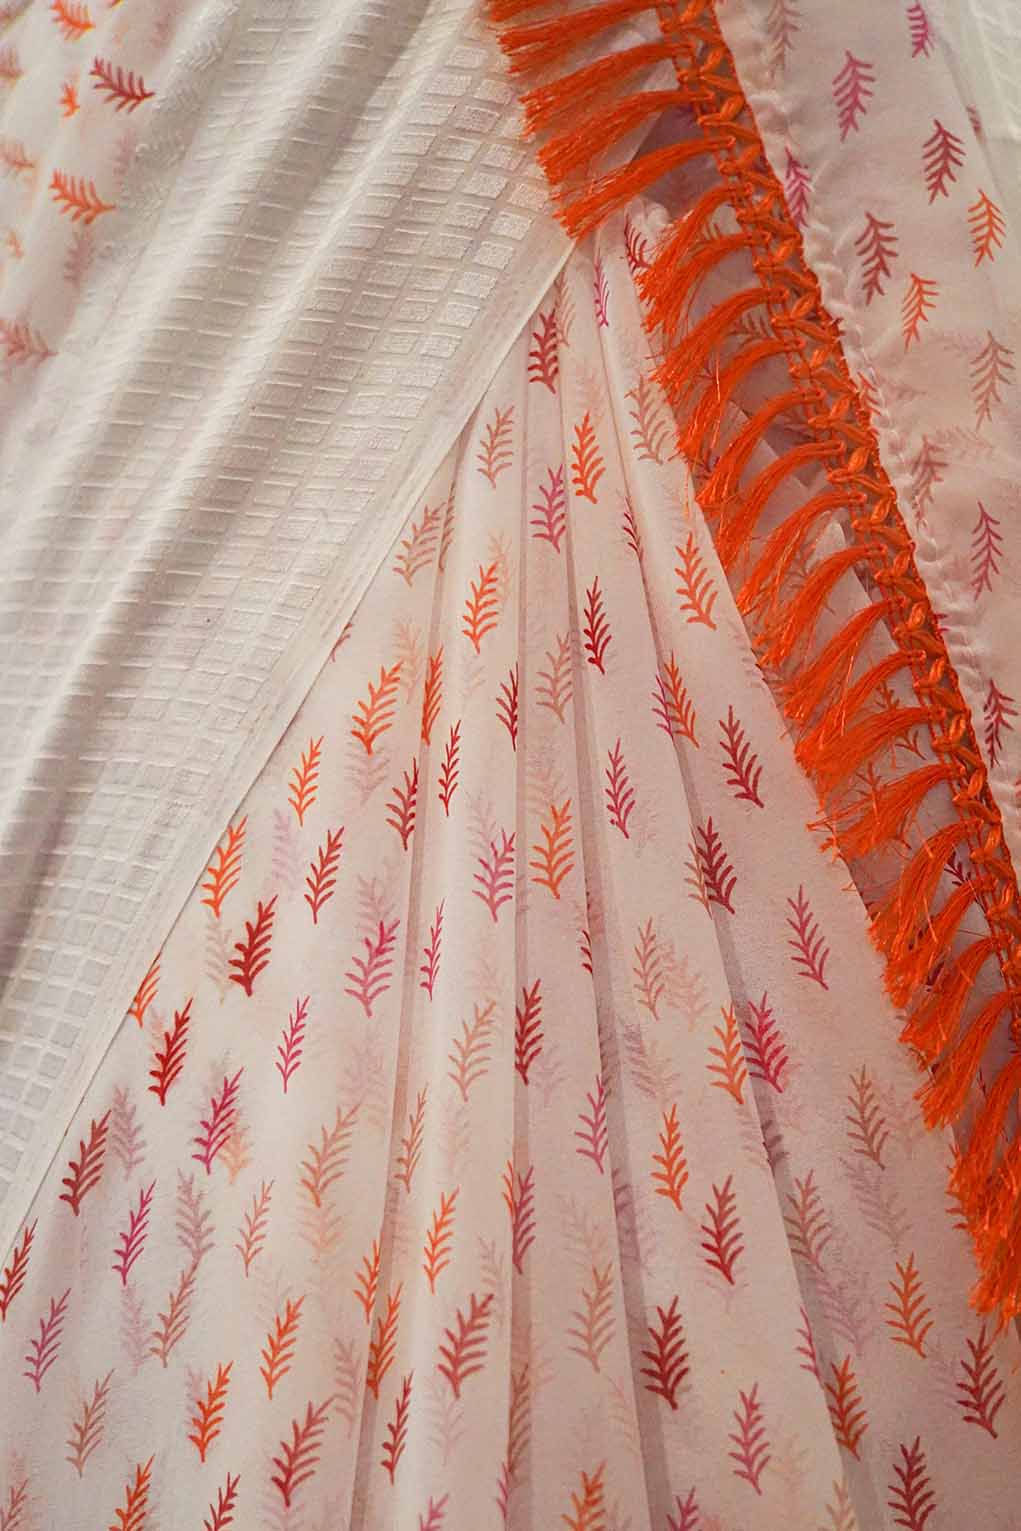 Ready to wear White & Orange Digital Over all Printed one minute ready made saree and readymade blouse - Isadora Life